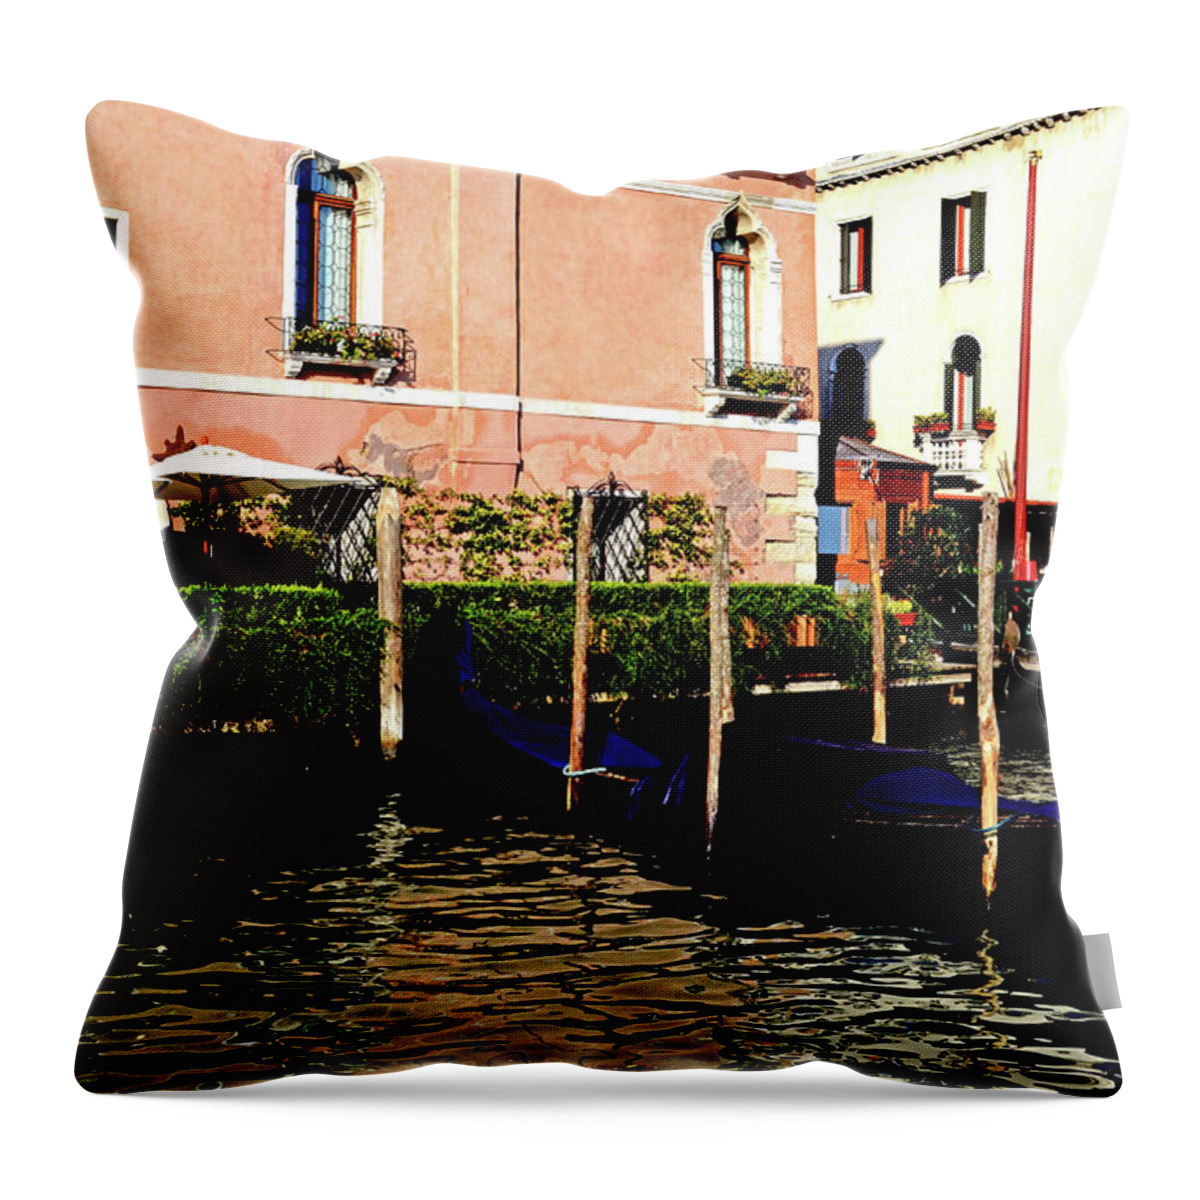 Italy Throw Pillow featuring the photograph Gandola Docking by La Dolce Vita